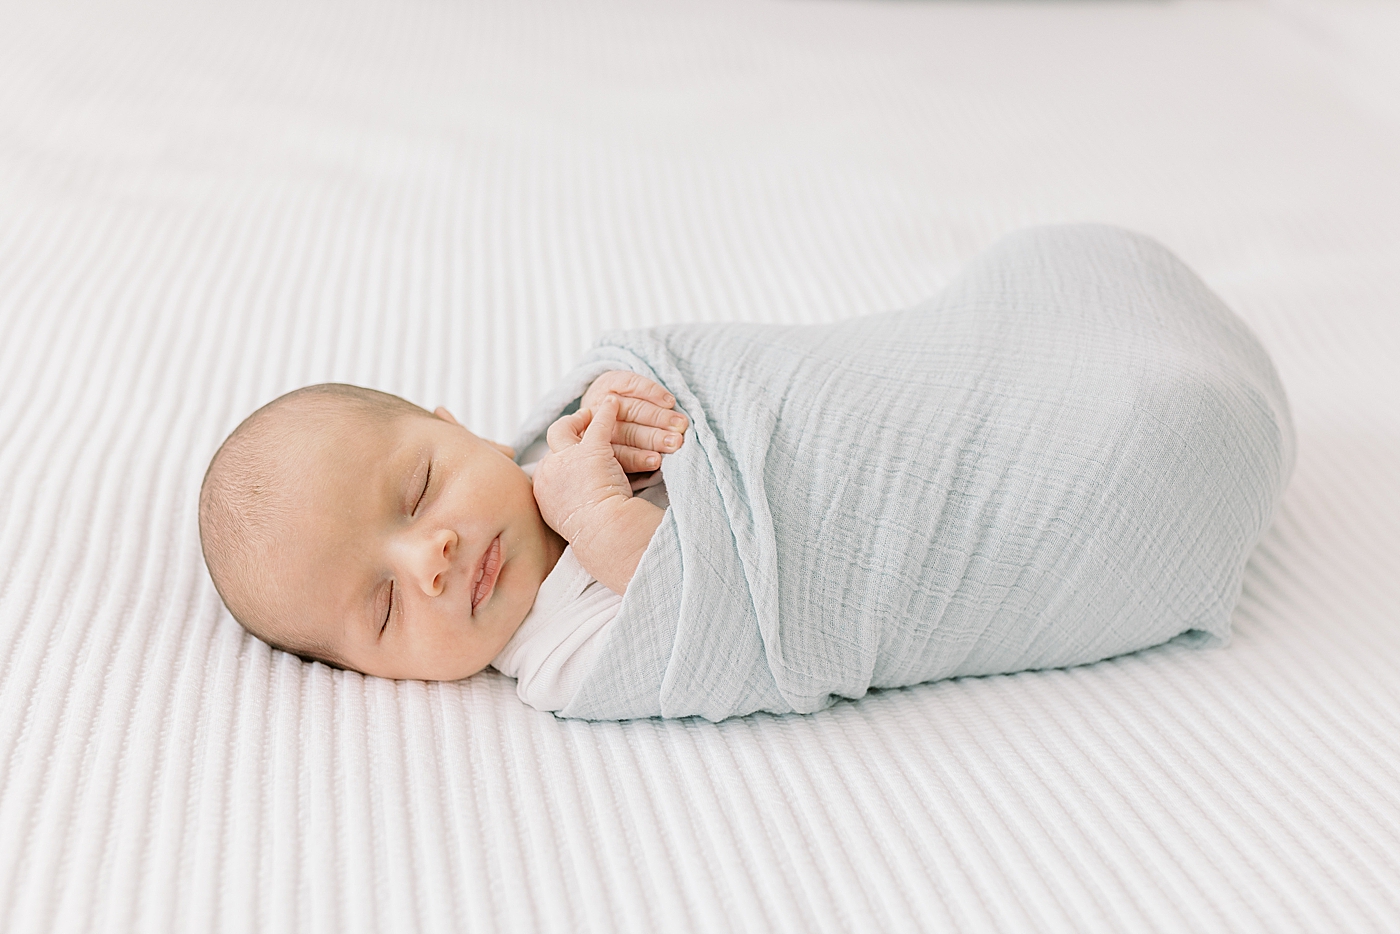 Sleeping baby wrapped in a swaddle during lifestyle newborn photos | Image by Caitlyn Motycka